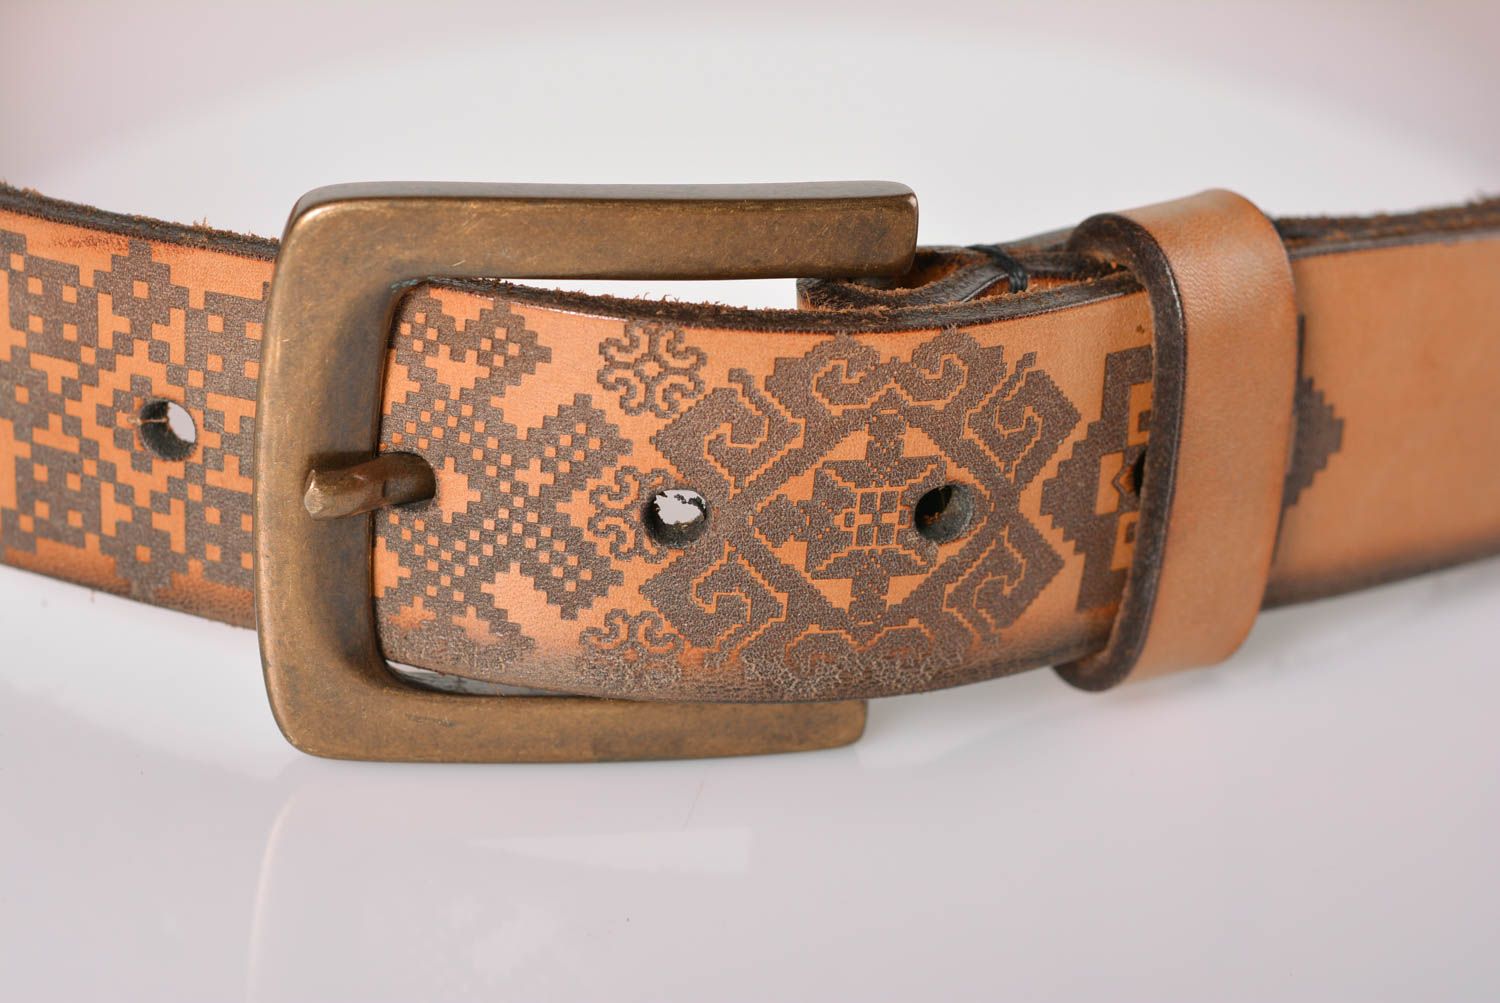 Leather belt handmade leather accessories birthday gifts for him leather goods photo 2